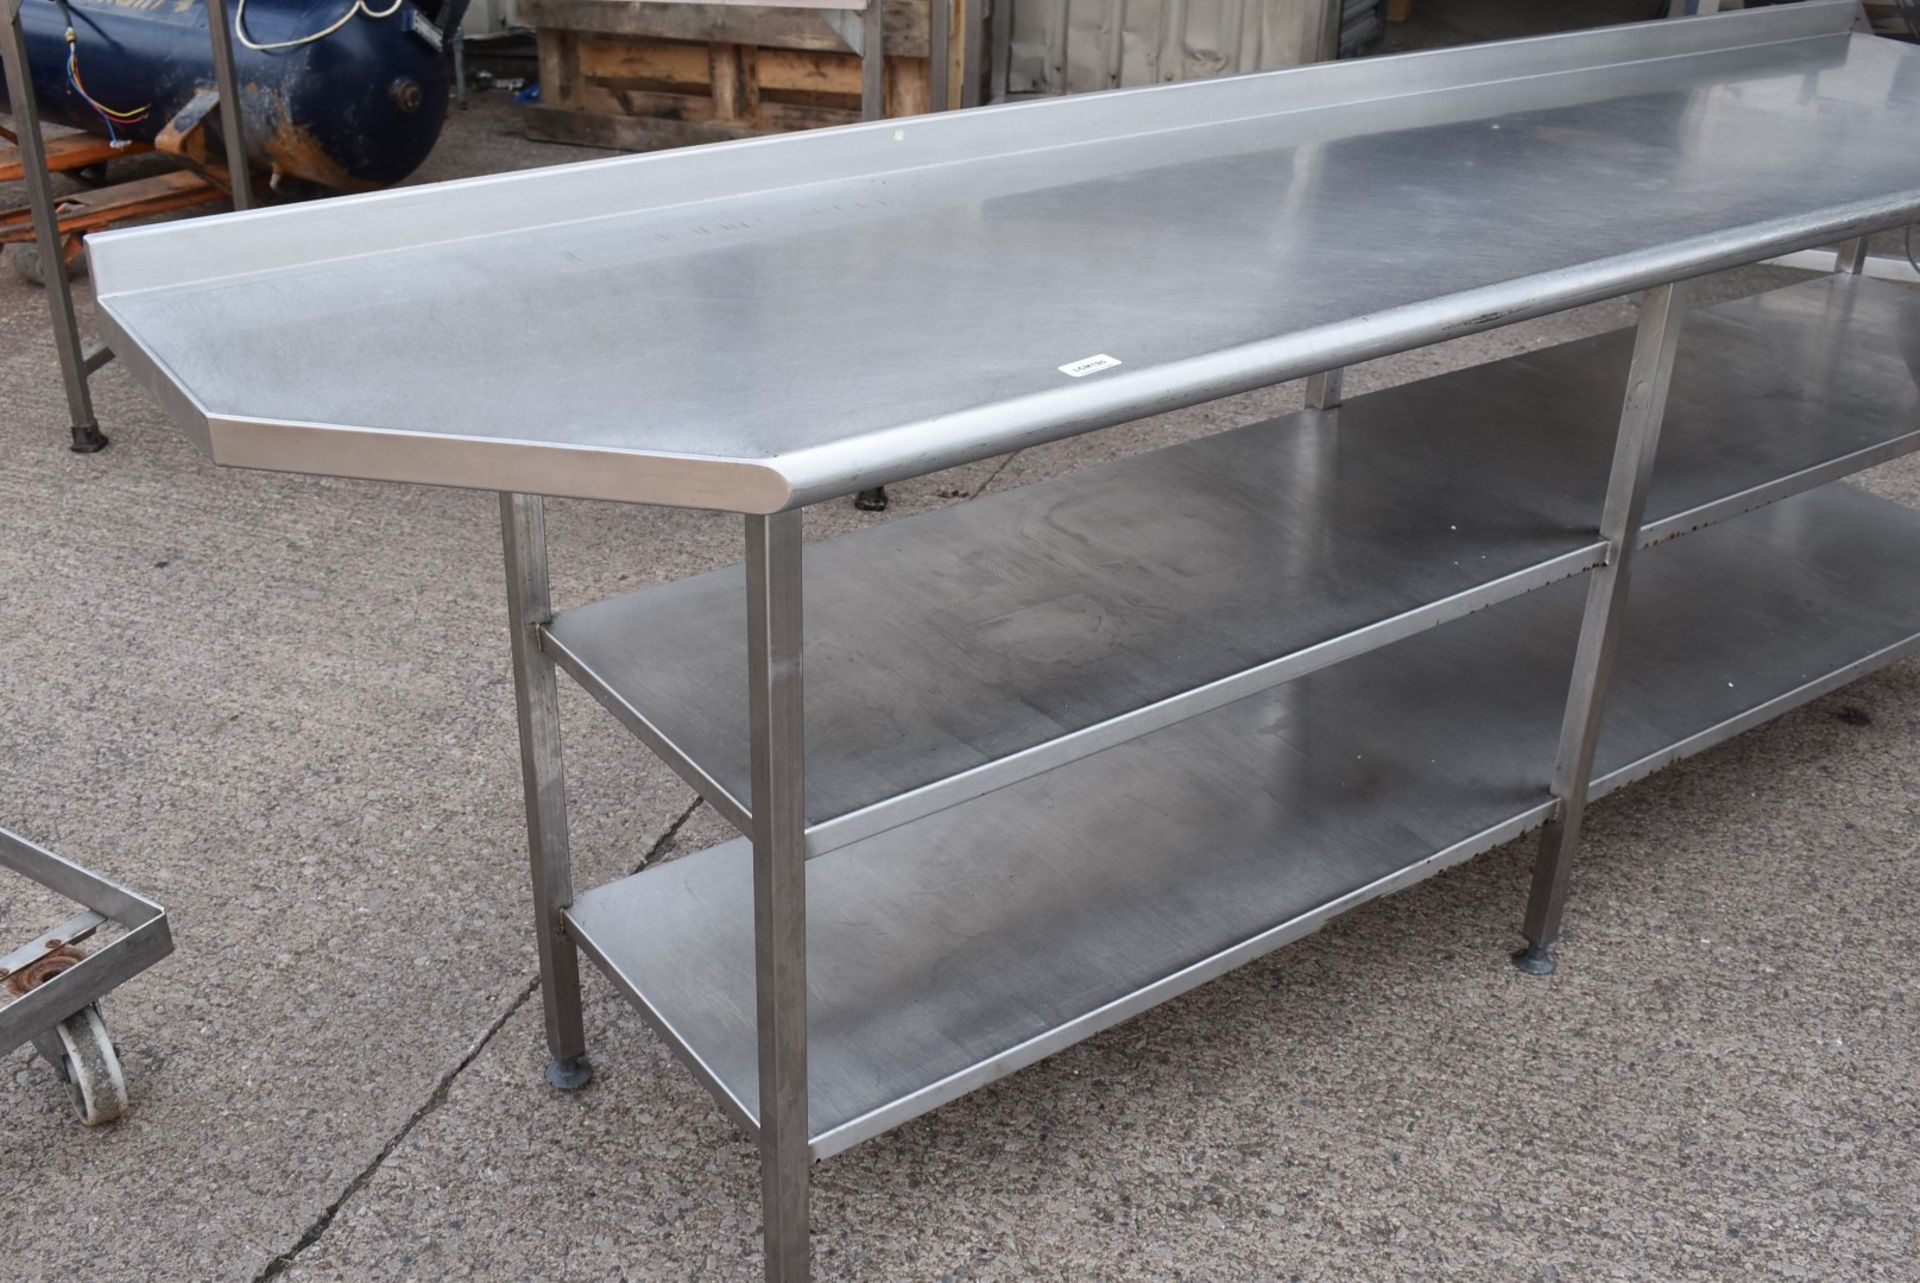 1 x Large 8ft Commercial Kitchen Prep Table With Undershelves and Upstand - Stainless Steel - - Image 2 of 9